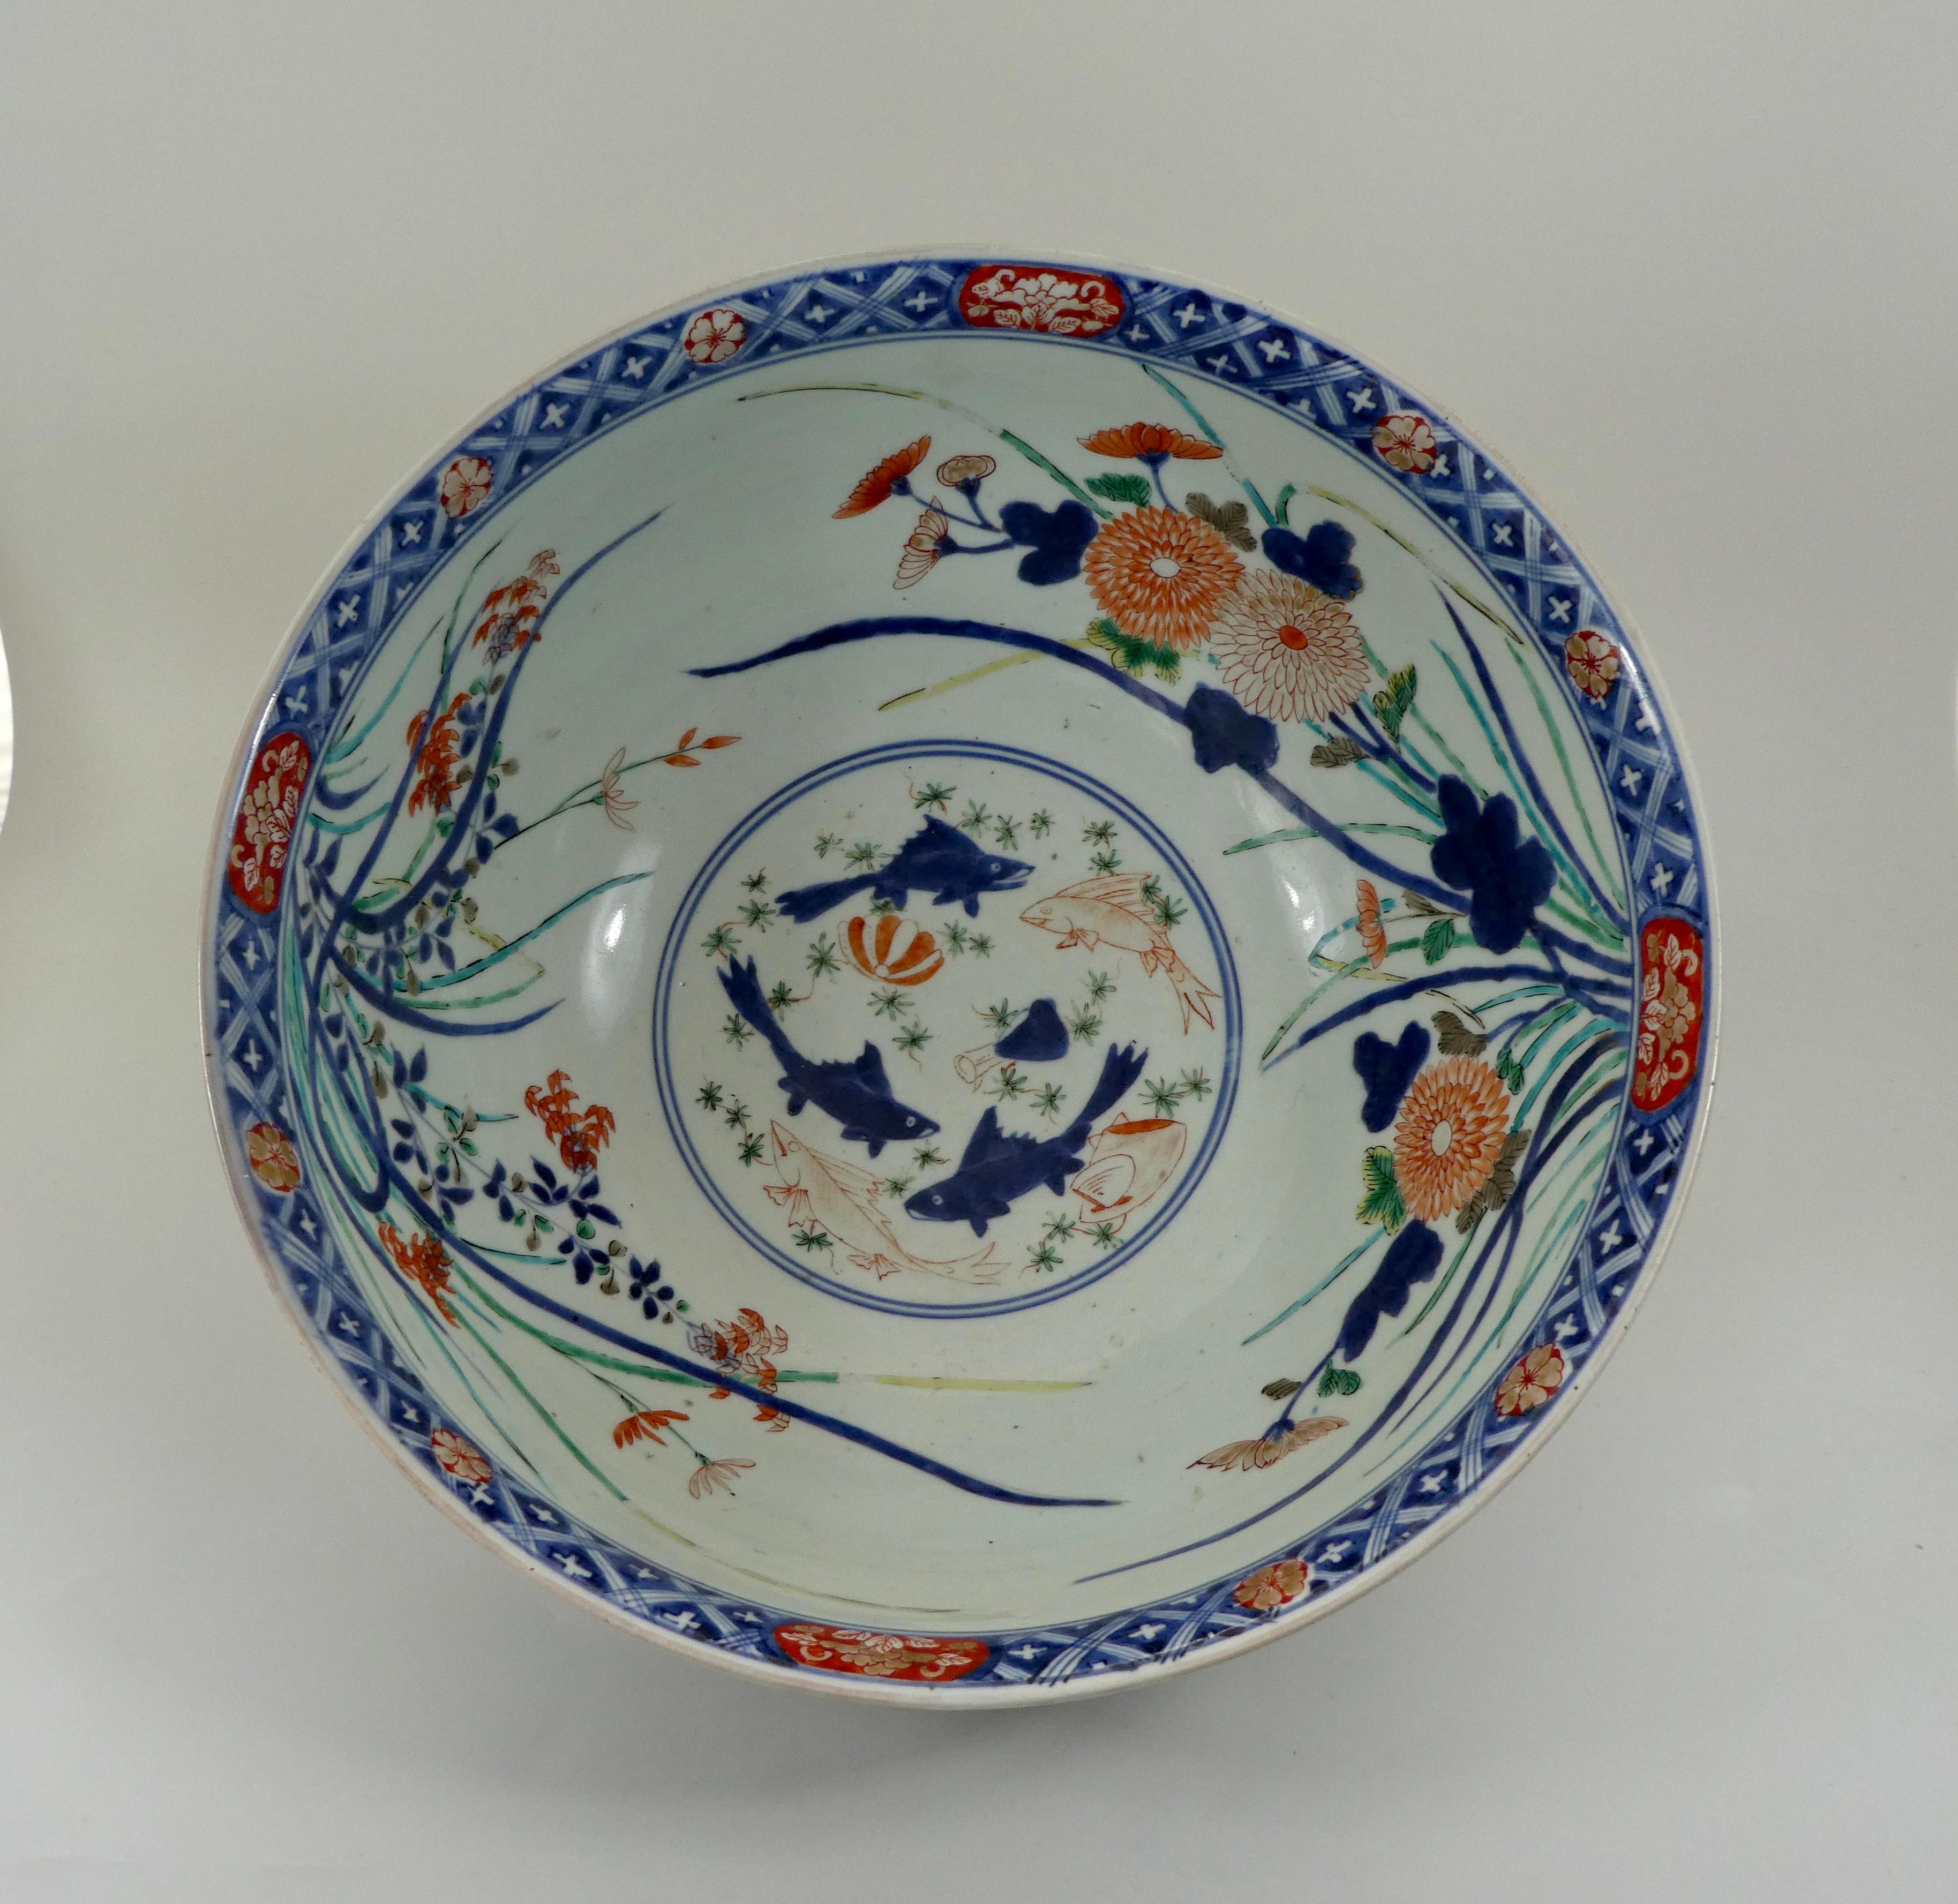 A fine and large Japanese Imari bowl, late 17th century, Genroku, period (1688-1704).
Decorated in iron-red, yellow, green, light blue, aubergine and black enamels, and gilt on underglaze blue, the interior with a central roundel containing fish